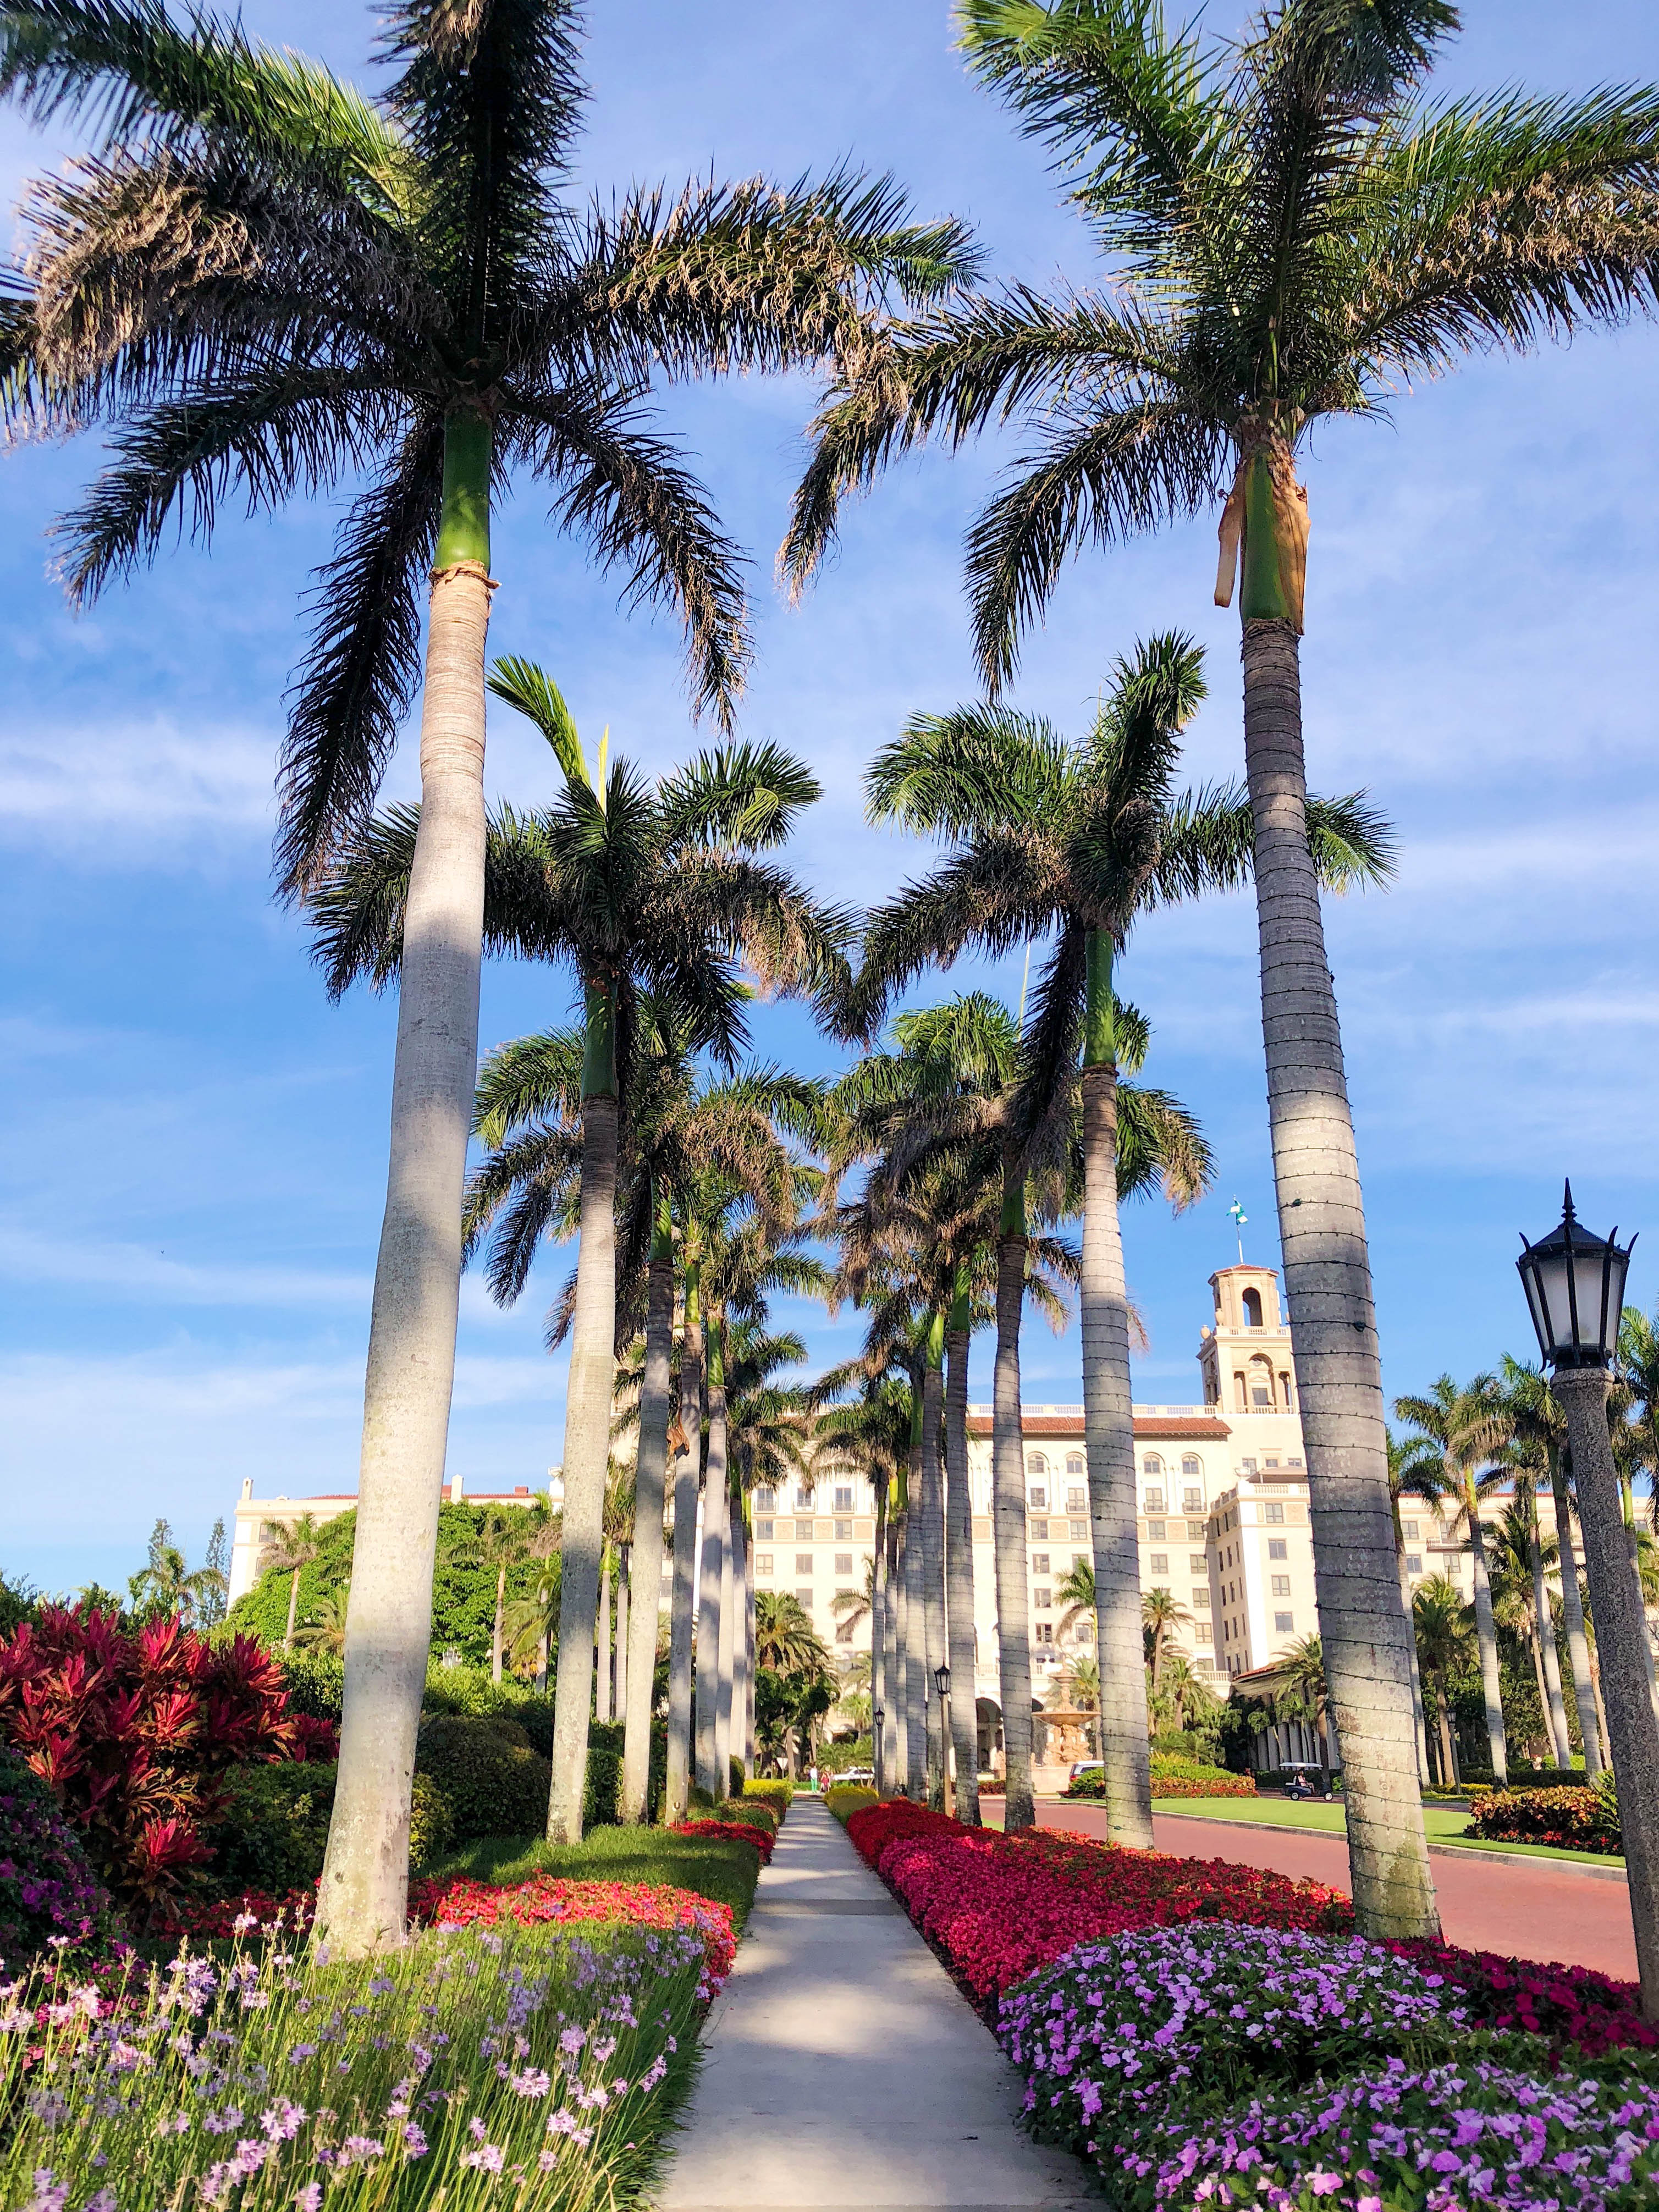 Palm Beach, Palm Beach Travel Guide, The Breakers Palm Beach, Palm Beach Activities, What to do in Palm Beach, Where to eat in Palm Beach, Guide to Palm Beach, Travel Guide Palm Beach, Worth Avenue